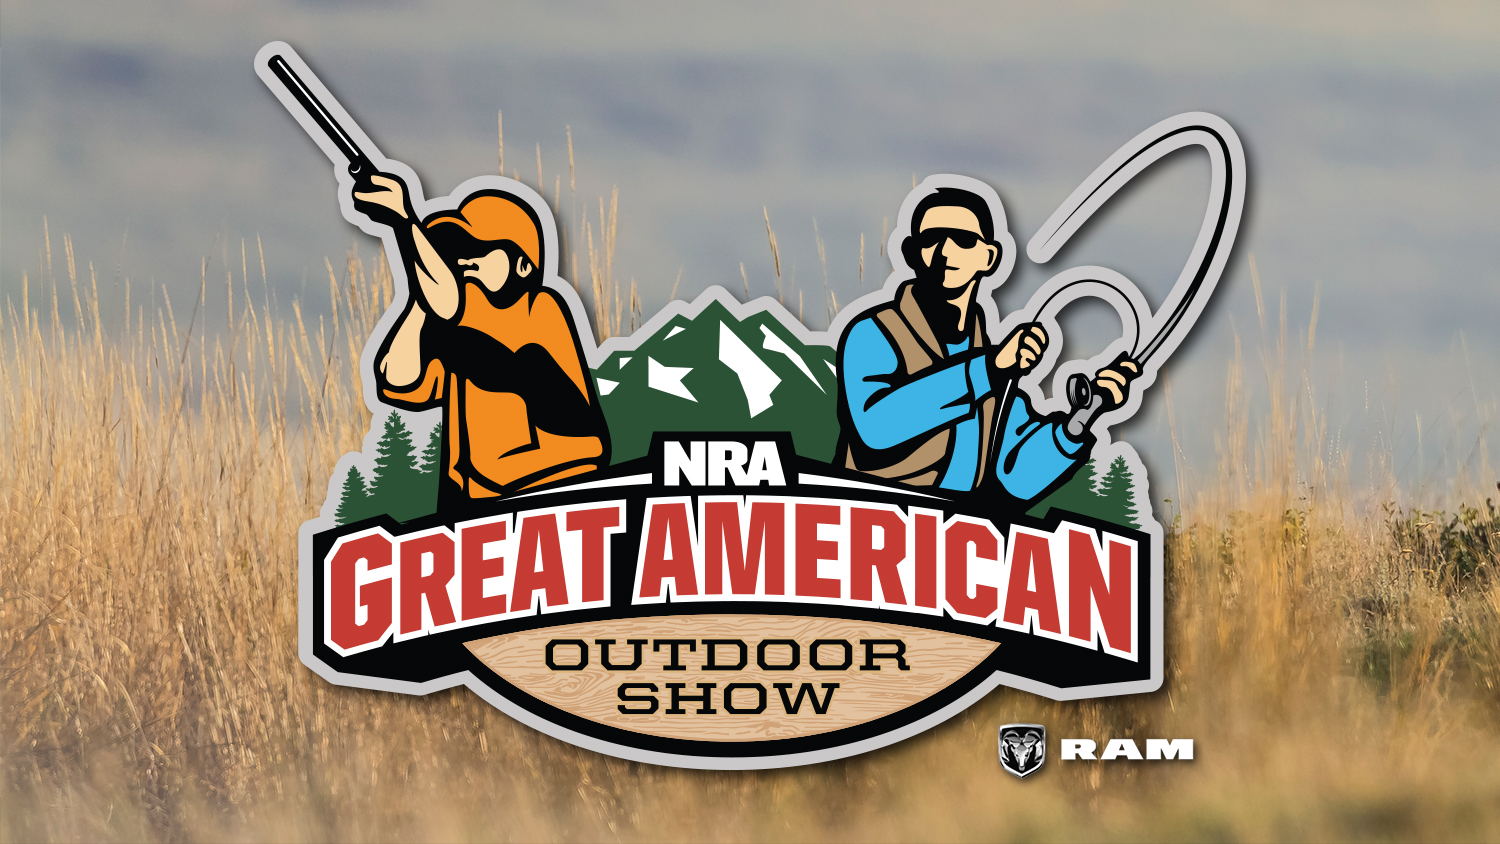 New and Not-to-Miss Attractions at the 2019 Great American Outdoor Show